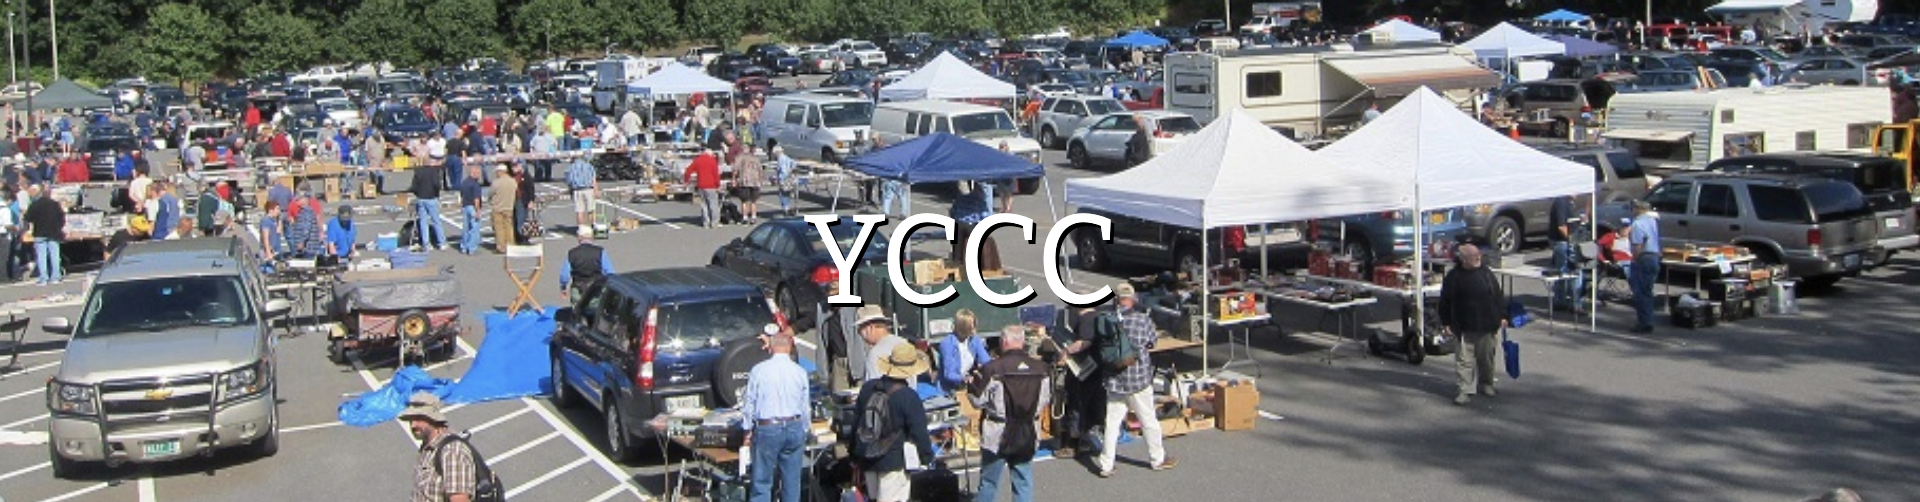 YCCC Activities at HamXposition